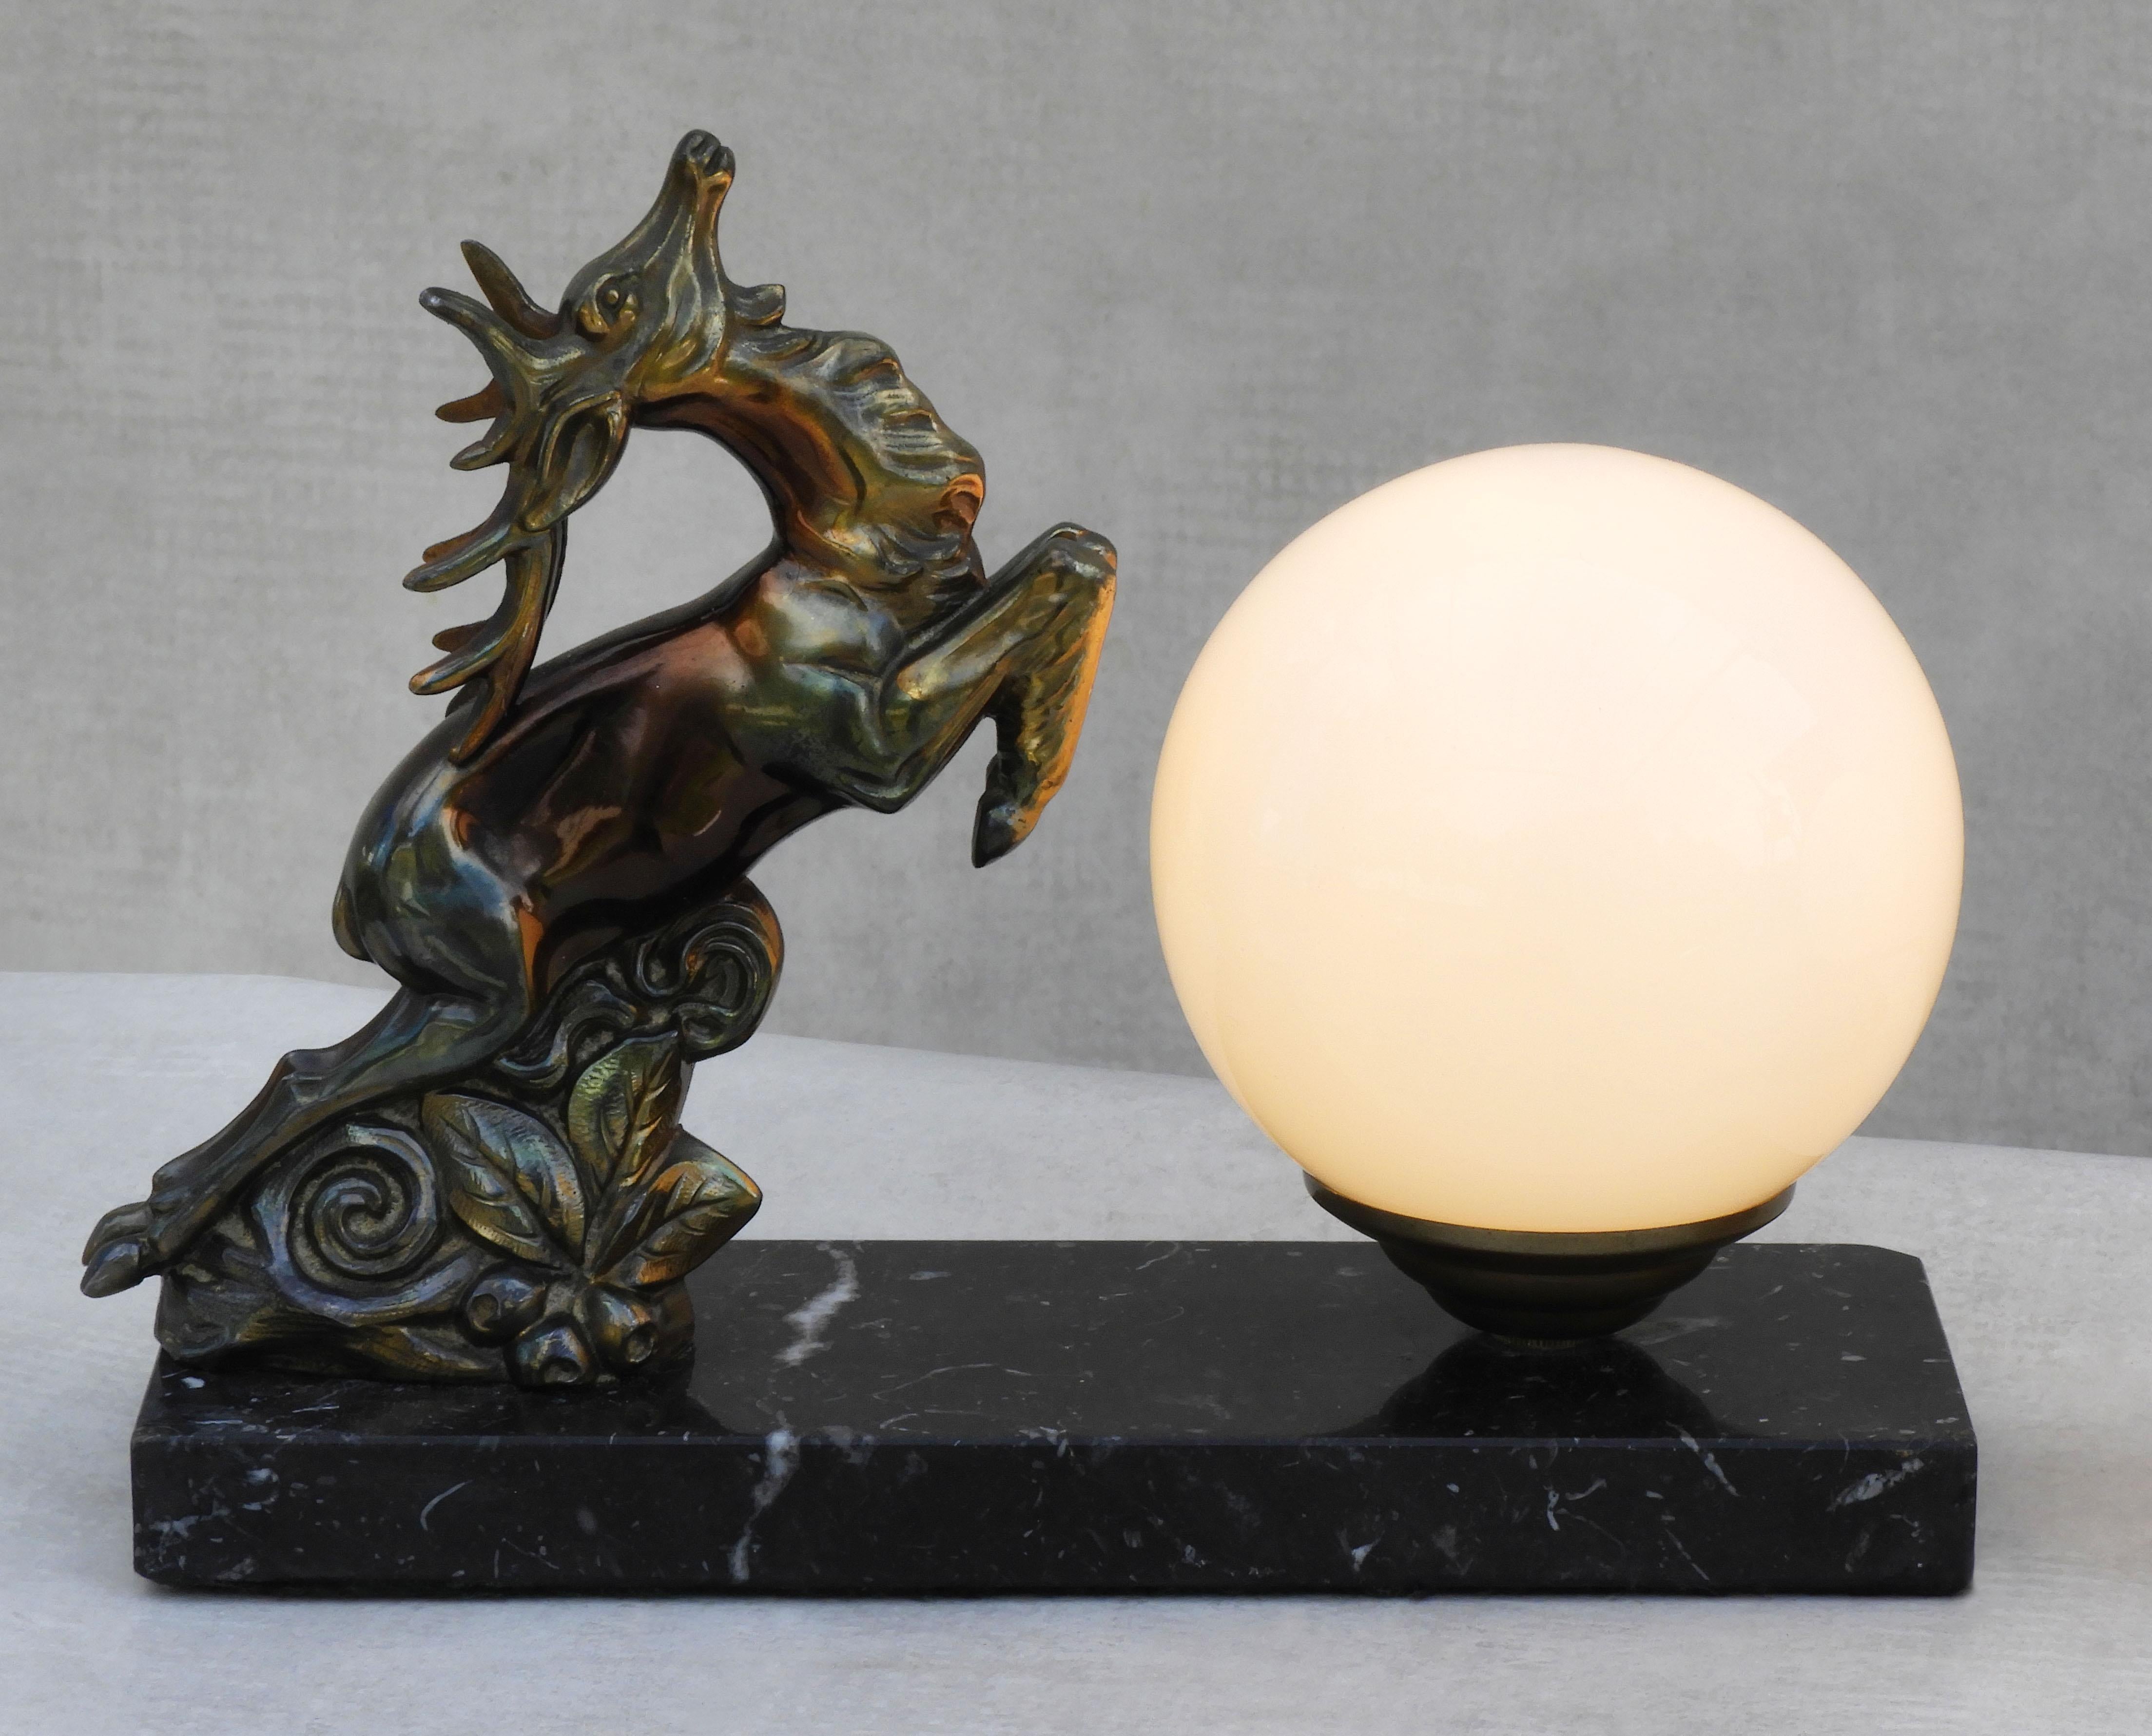 20th Century Pair of French Art Deco Deer Table Lamps or Night Light Sculptures C1930 For Sale